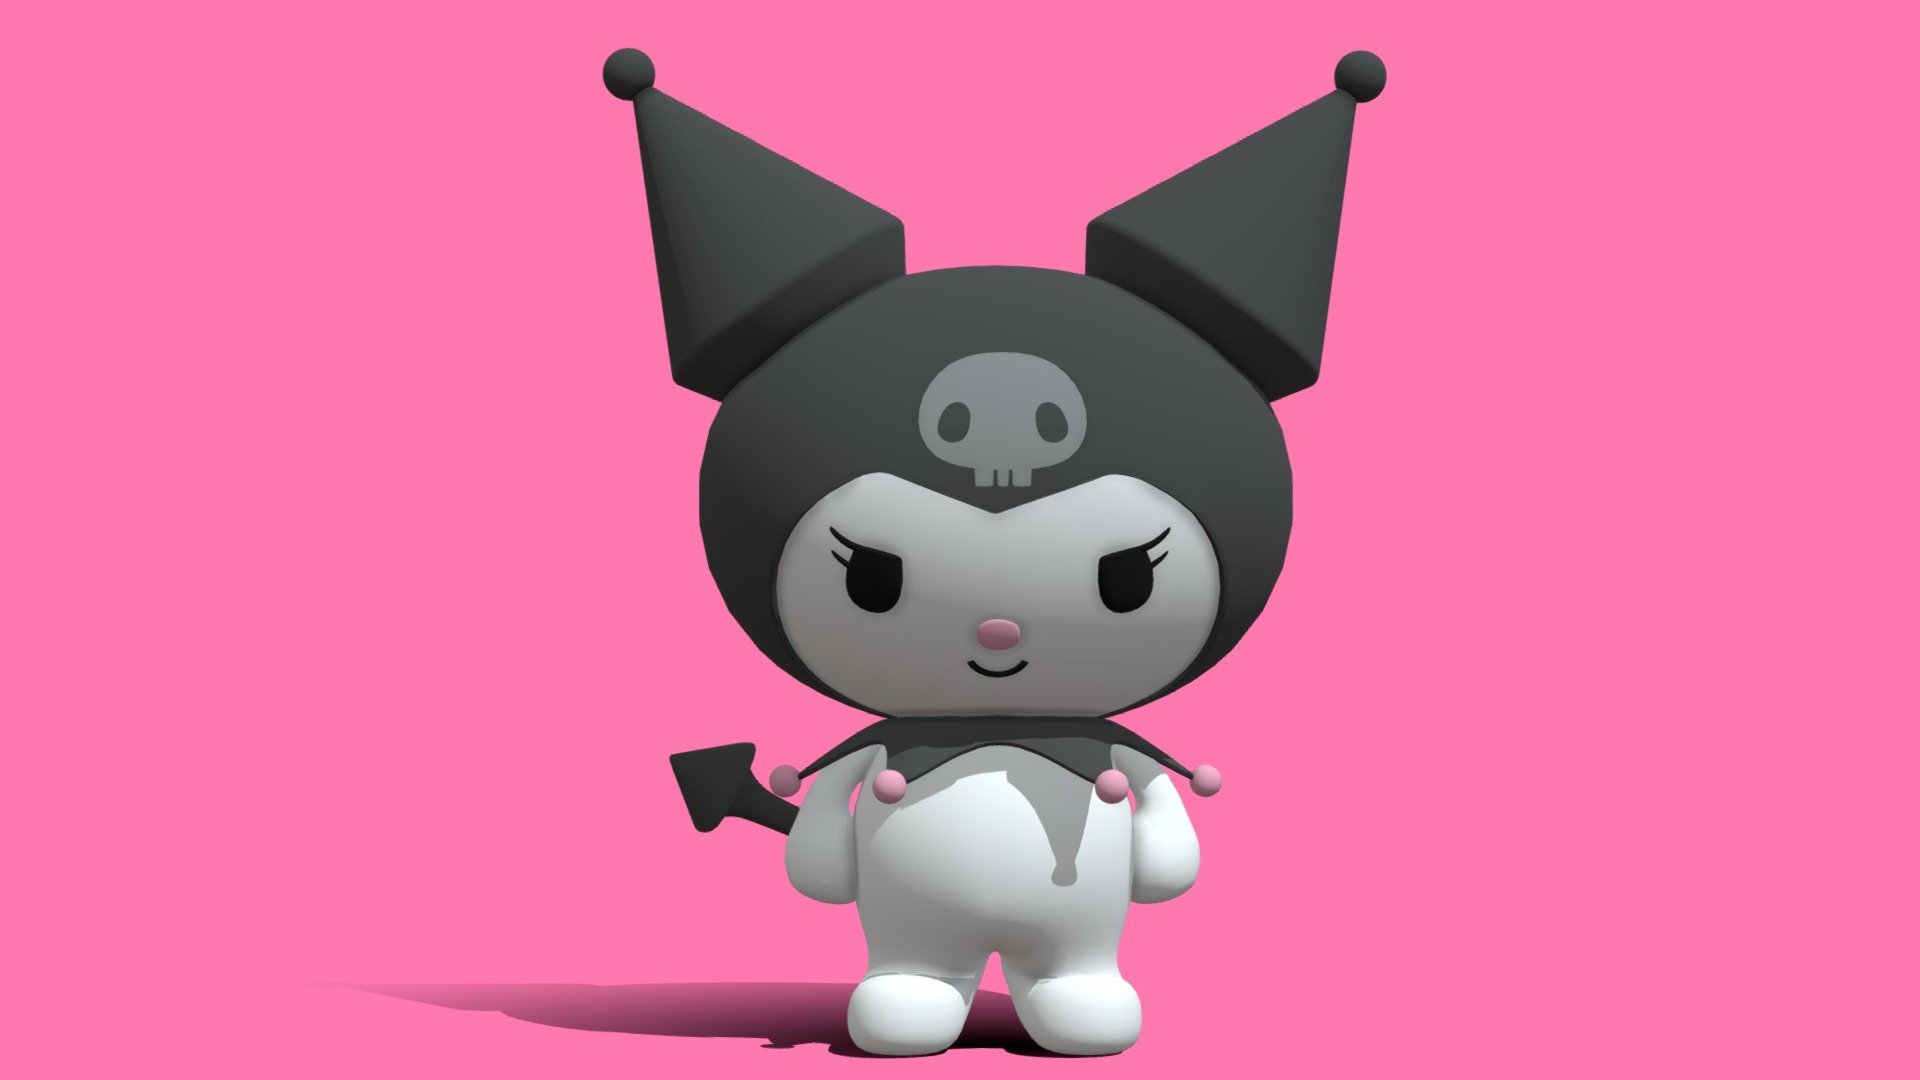 A simple and cute 3D model of popular Sanrio character Kuromi.

File Formats





FBX - Not Rigged




glTF - Not Rigged




OBJ




STL




Native 3.5 Blender File



STL is recomended for 3D printing

Polygons:
29,860

Vertices:
15,057 - Sanrio Kuromi 3D Model - Buy Royalty Free 3D model by SirSquiggles 3d model